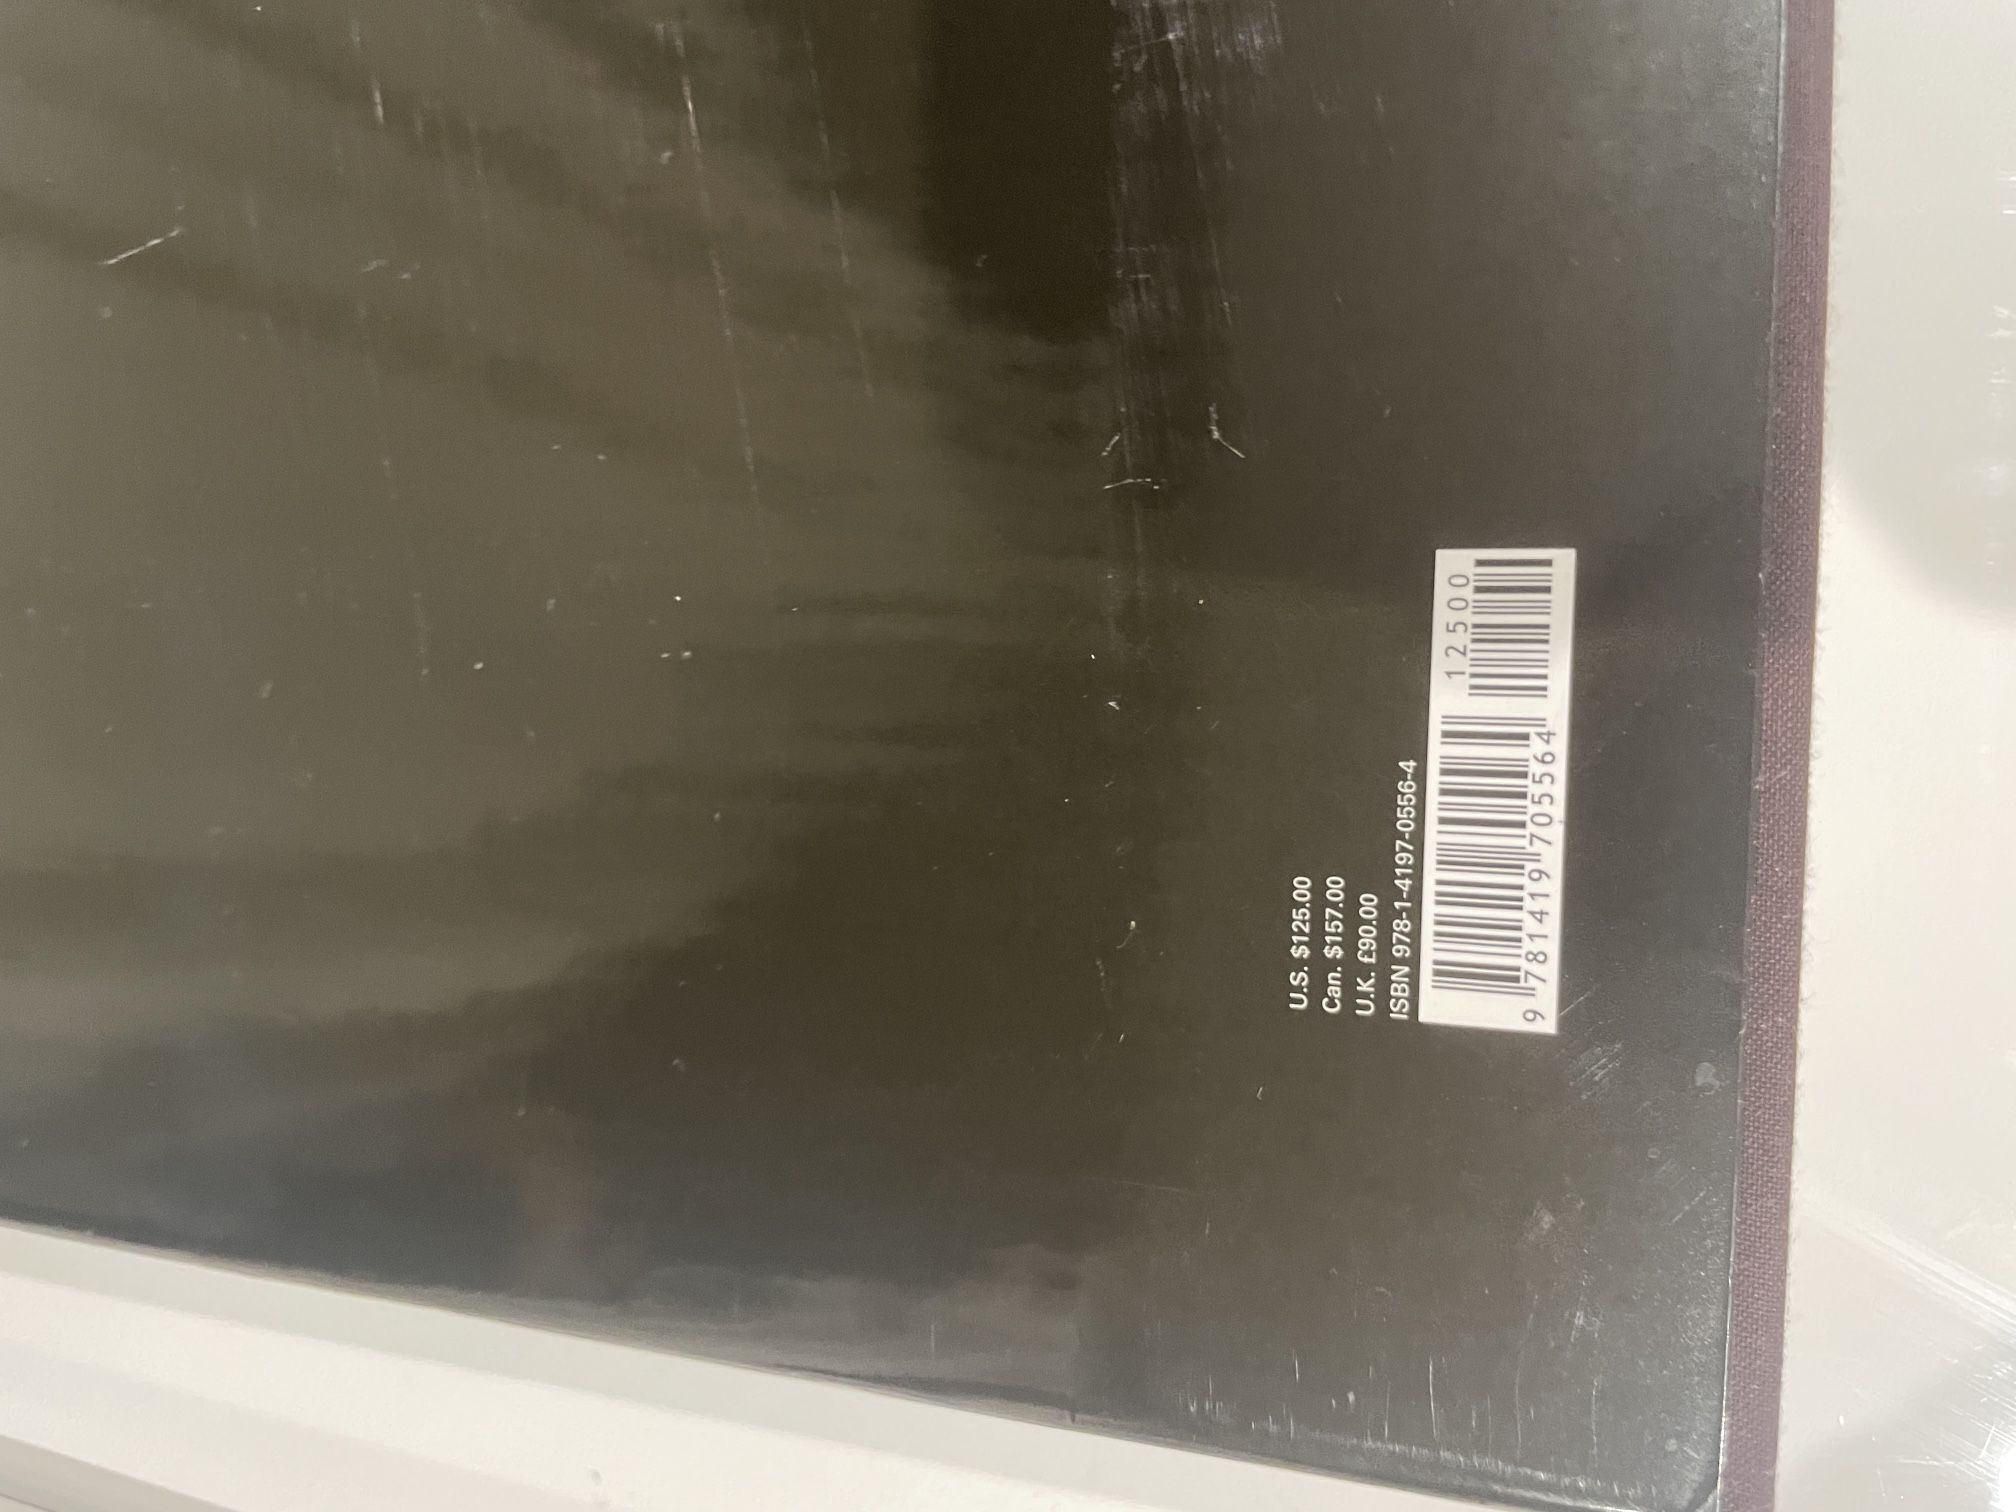 Designer Coffee Table Books - Tom Ford Book Chanel Book Louis Vuitton Book  for Sale in Burbank, CA - OfferUp